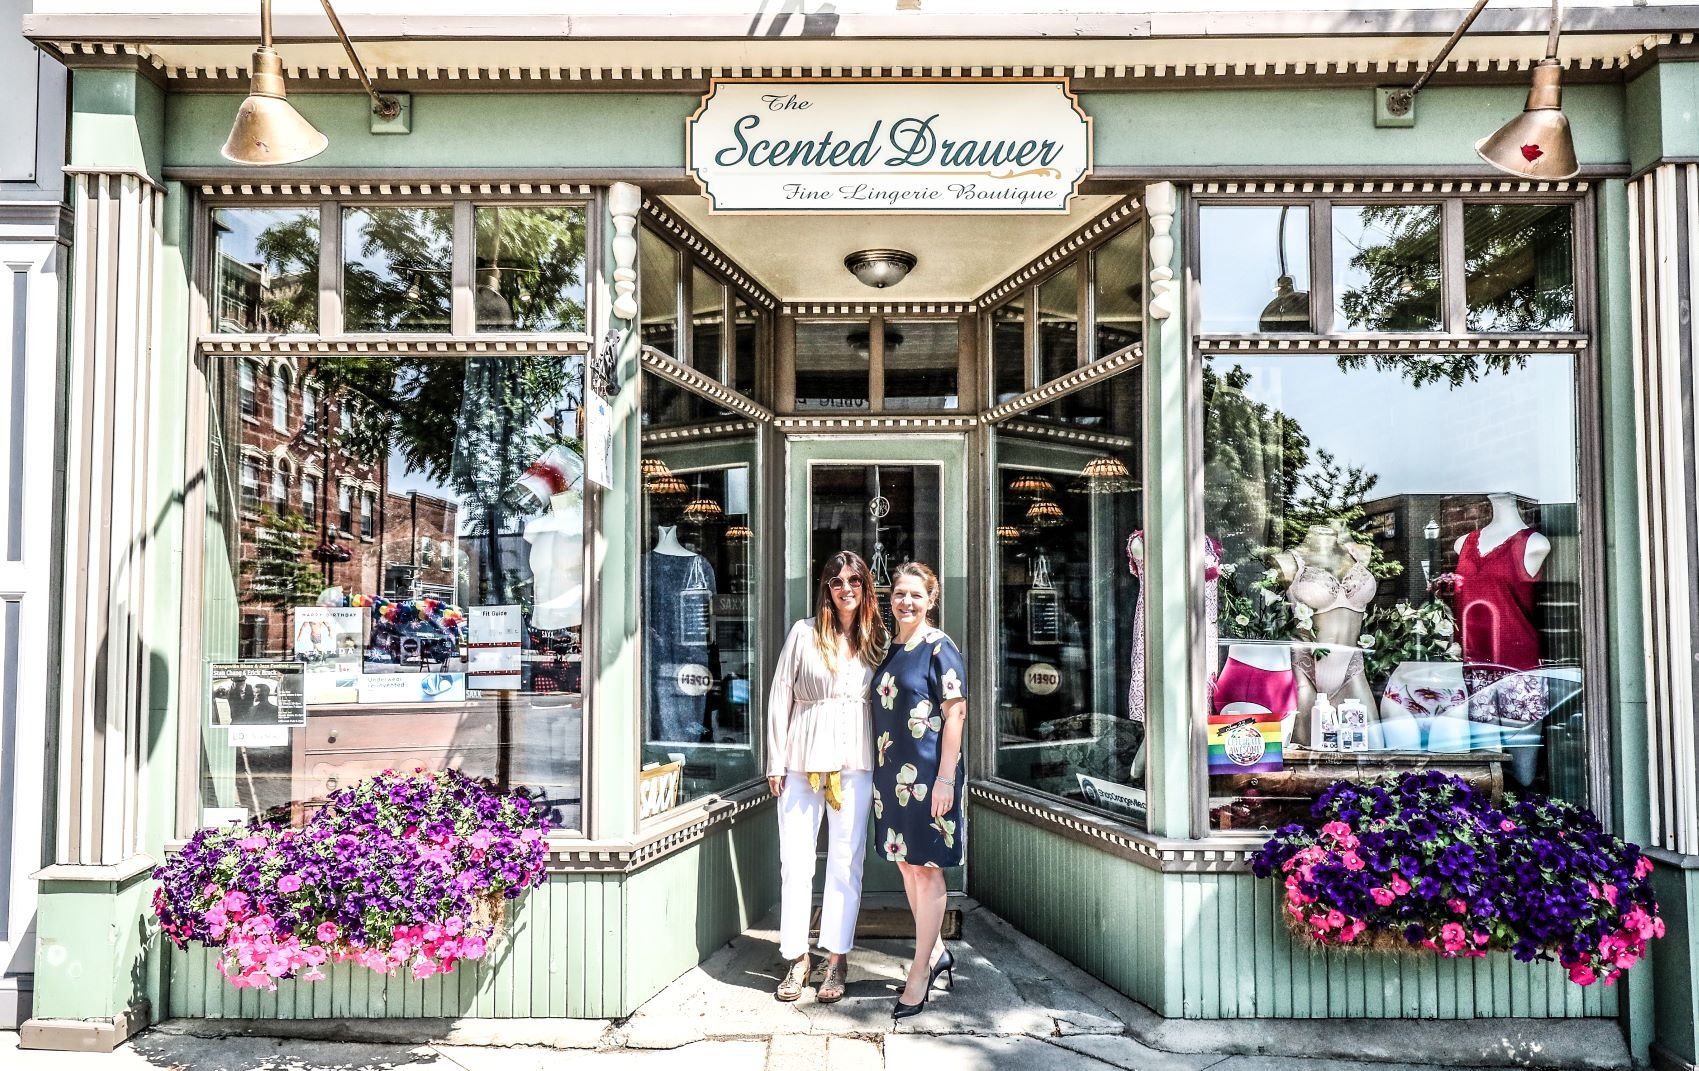 Two women standing in front of a retail shop